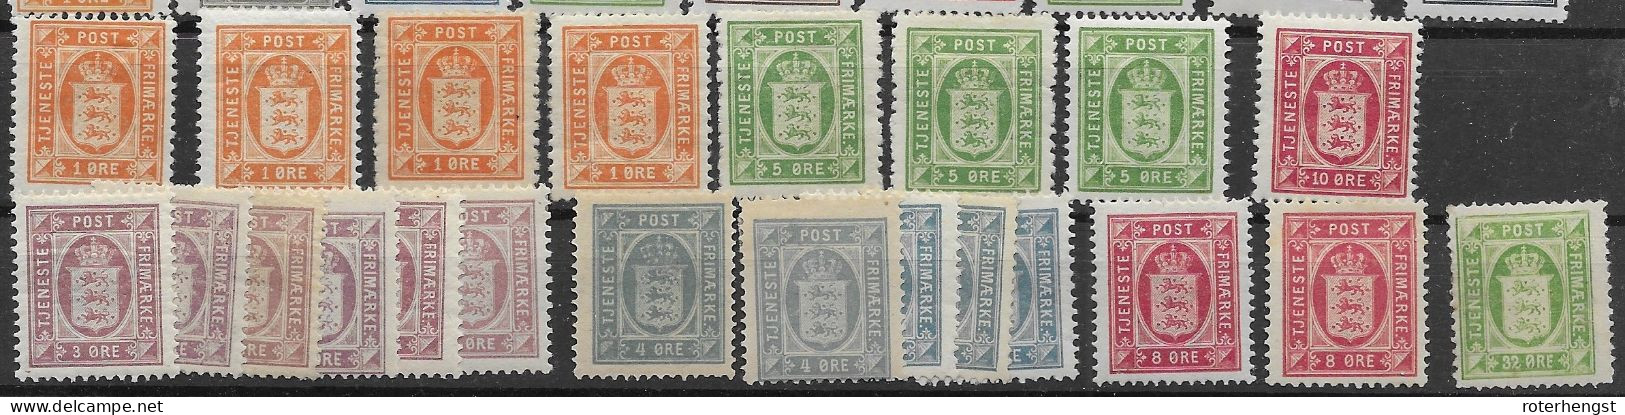 Denmark Officials Collection Mh* Some Are Mnh ** Different Perfs Wtm And Shades Over 200 Euros - Servizio